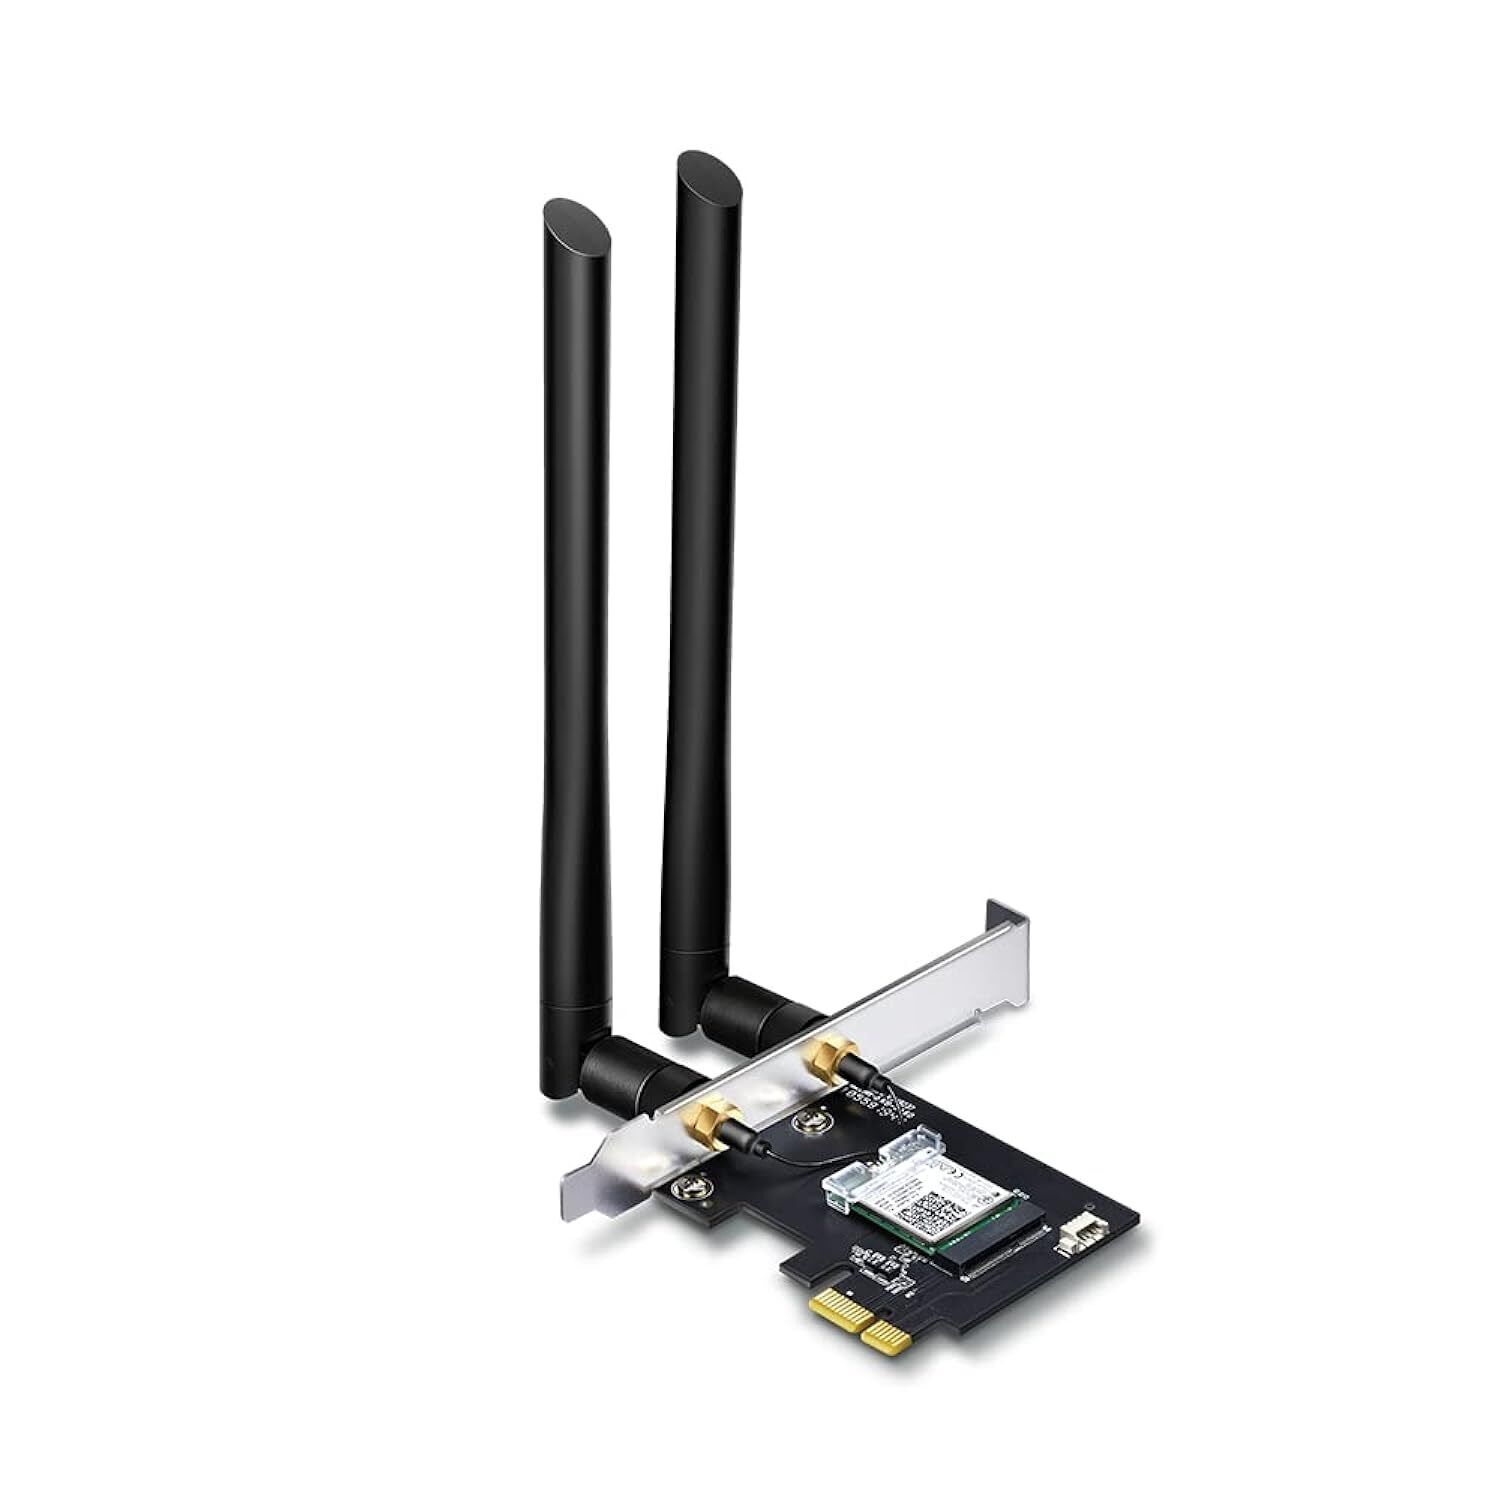 TP-Link AC1200 PCIe WiFi Card for PC (Archer T5E) - Bluetooth 4.2, Dual Band W